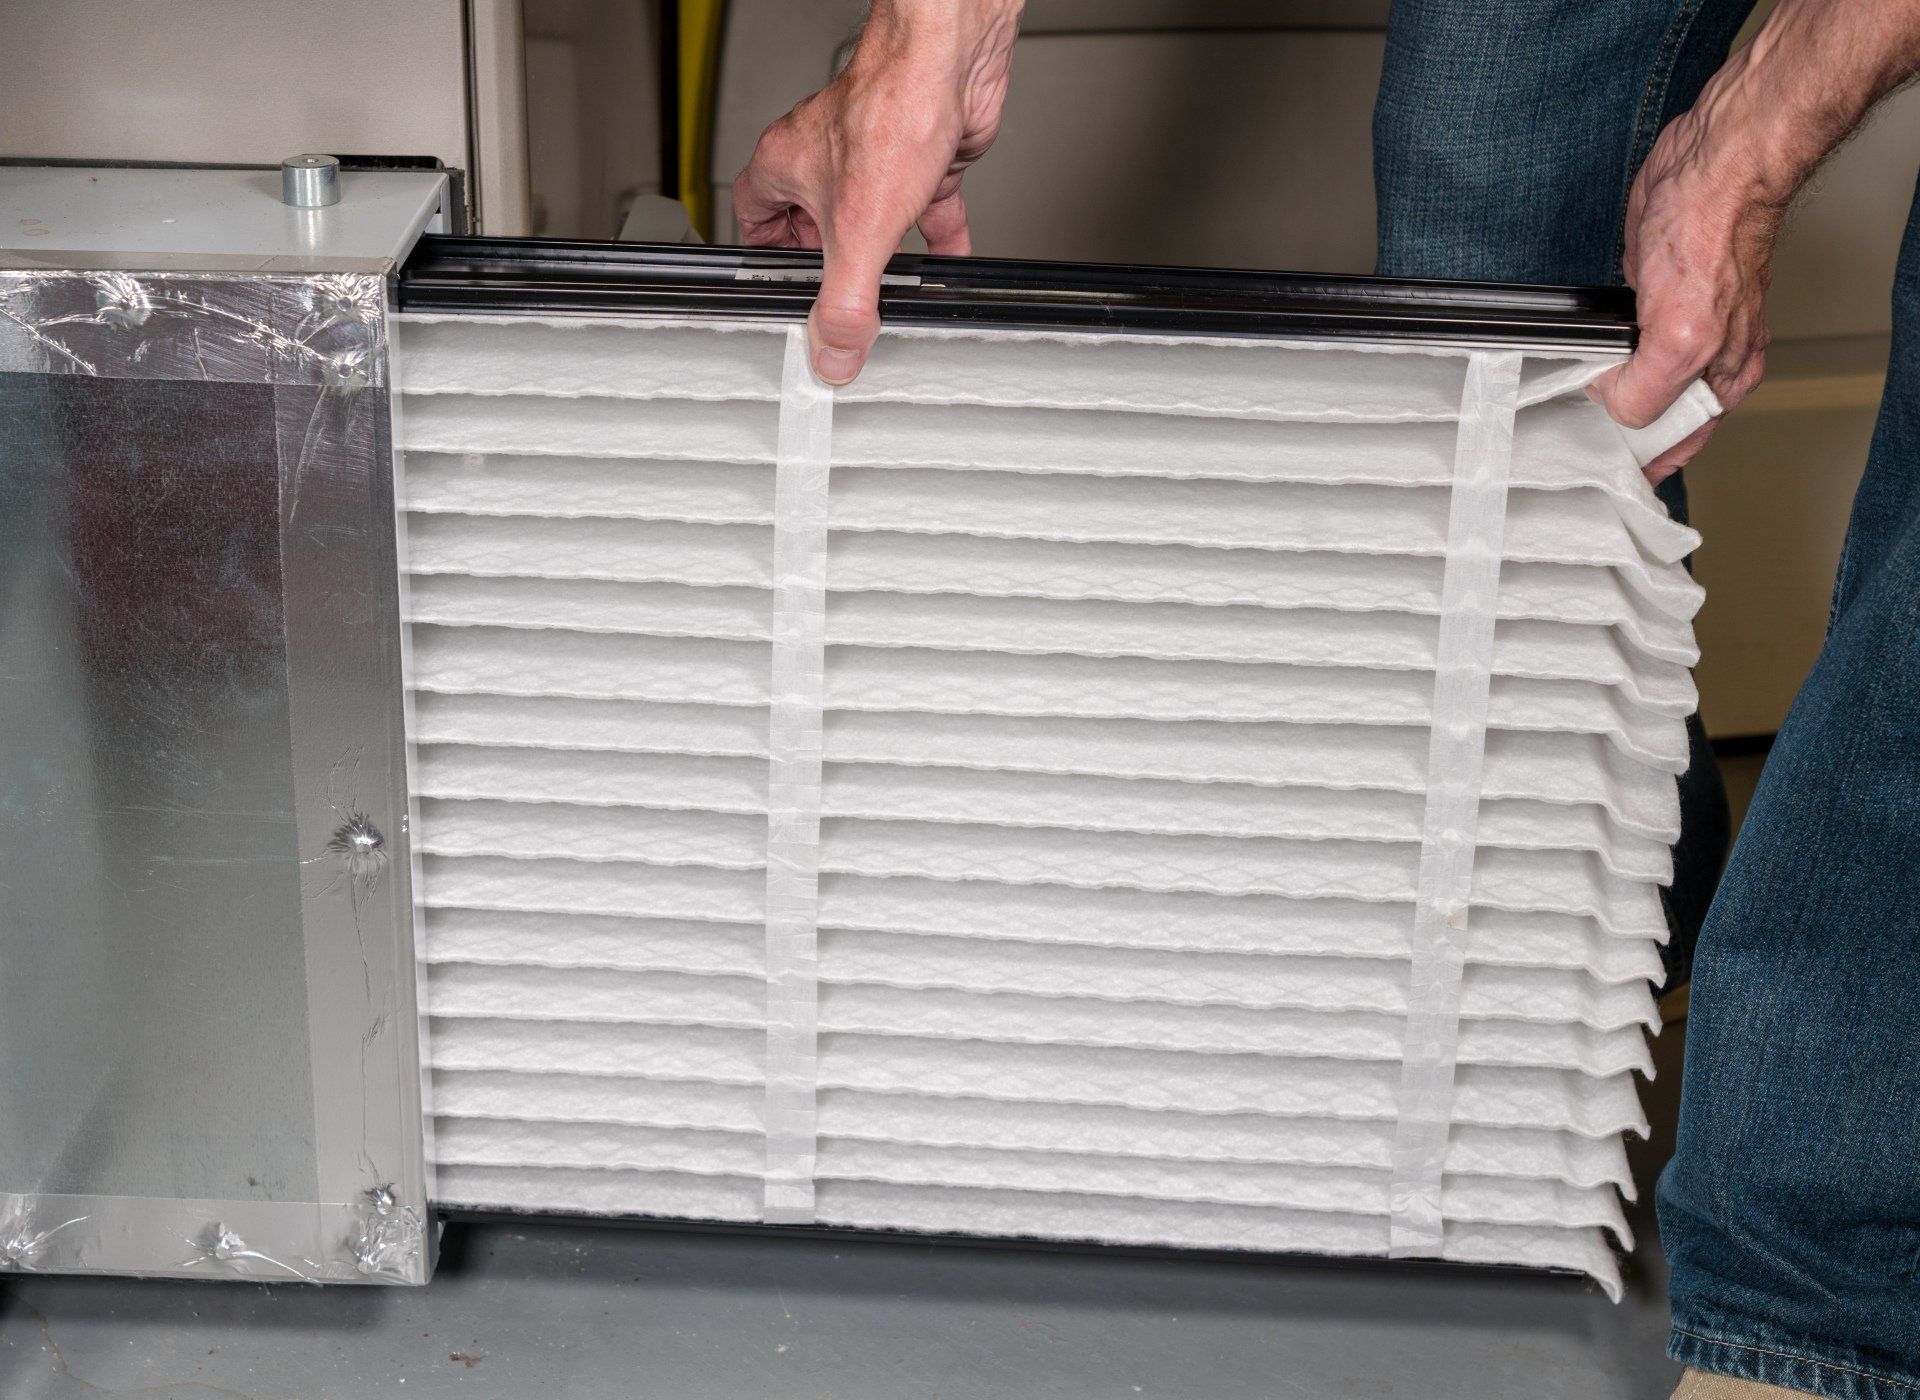 How Often Should You Change Your Furnace Filter, and Why is it Important?